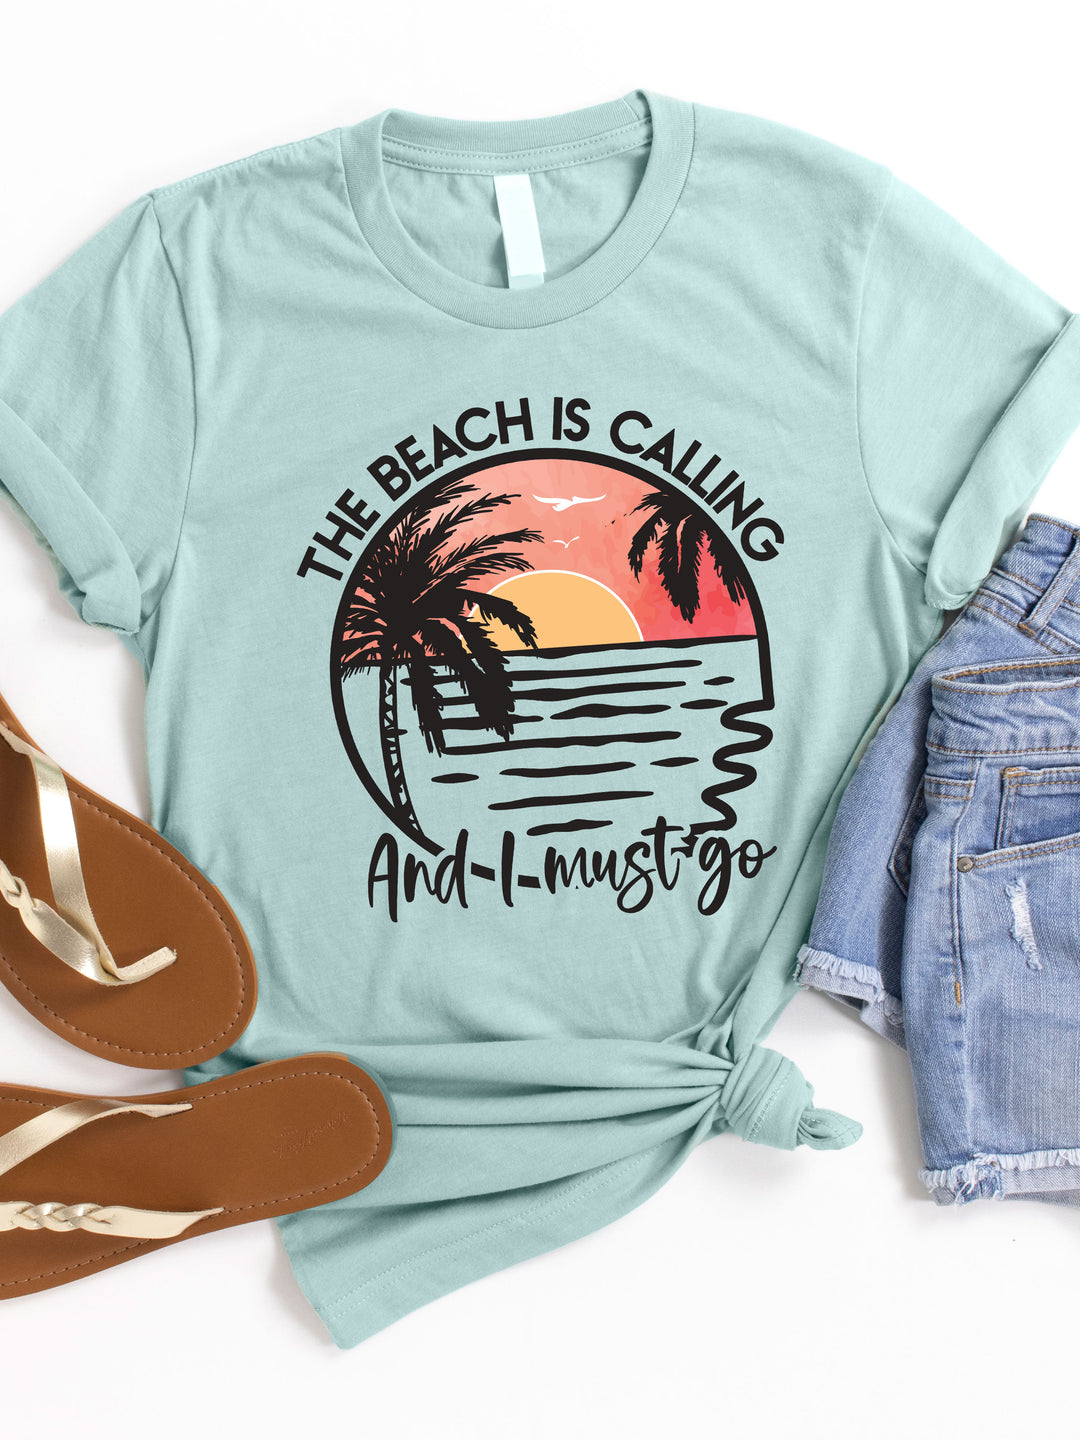 Beach is Calling Graphic Tee